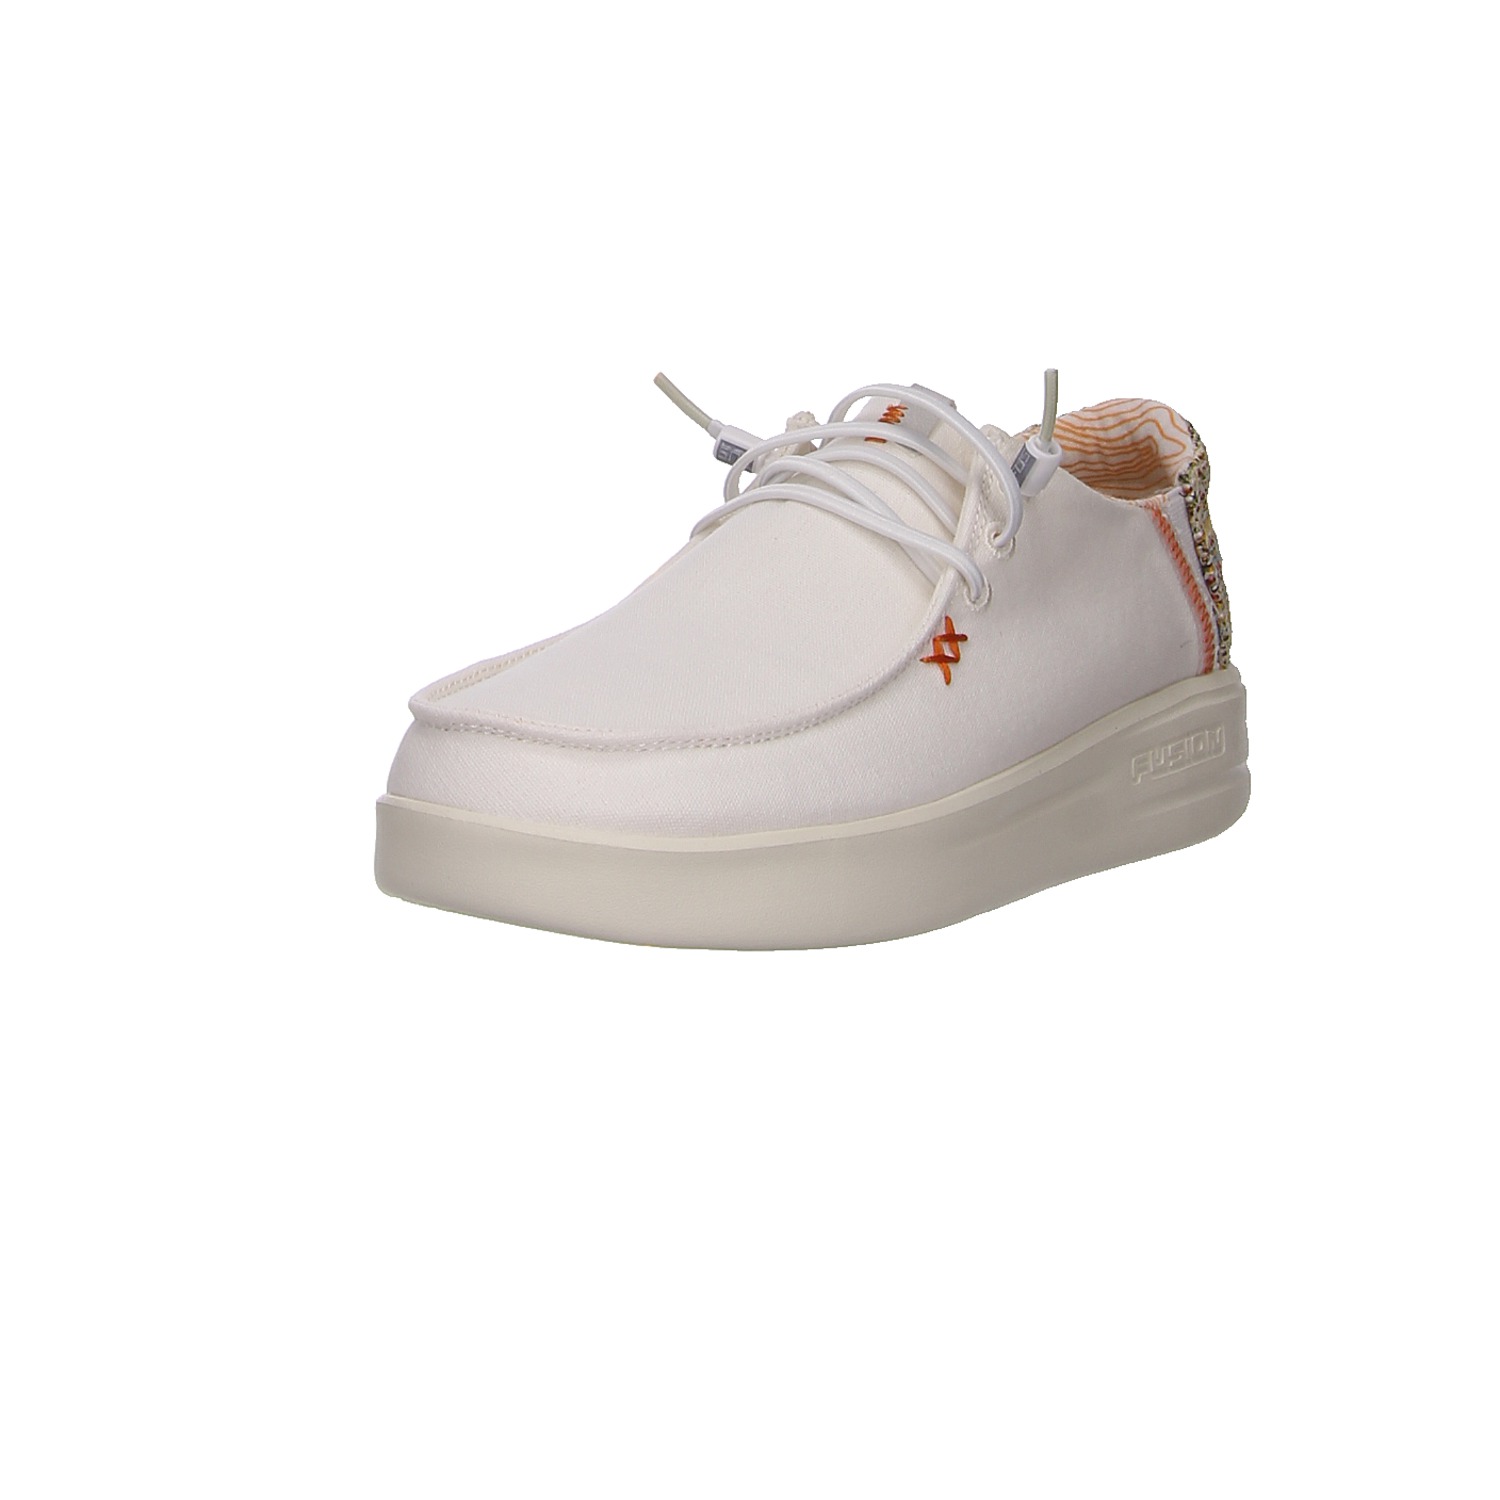 Fusion Frühjahr Sommer Lily canvas white